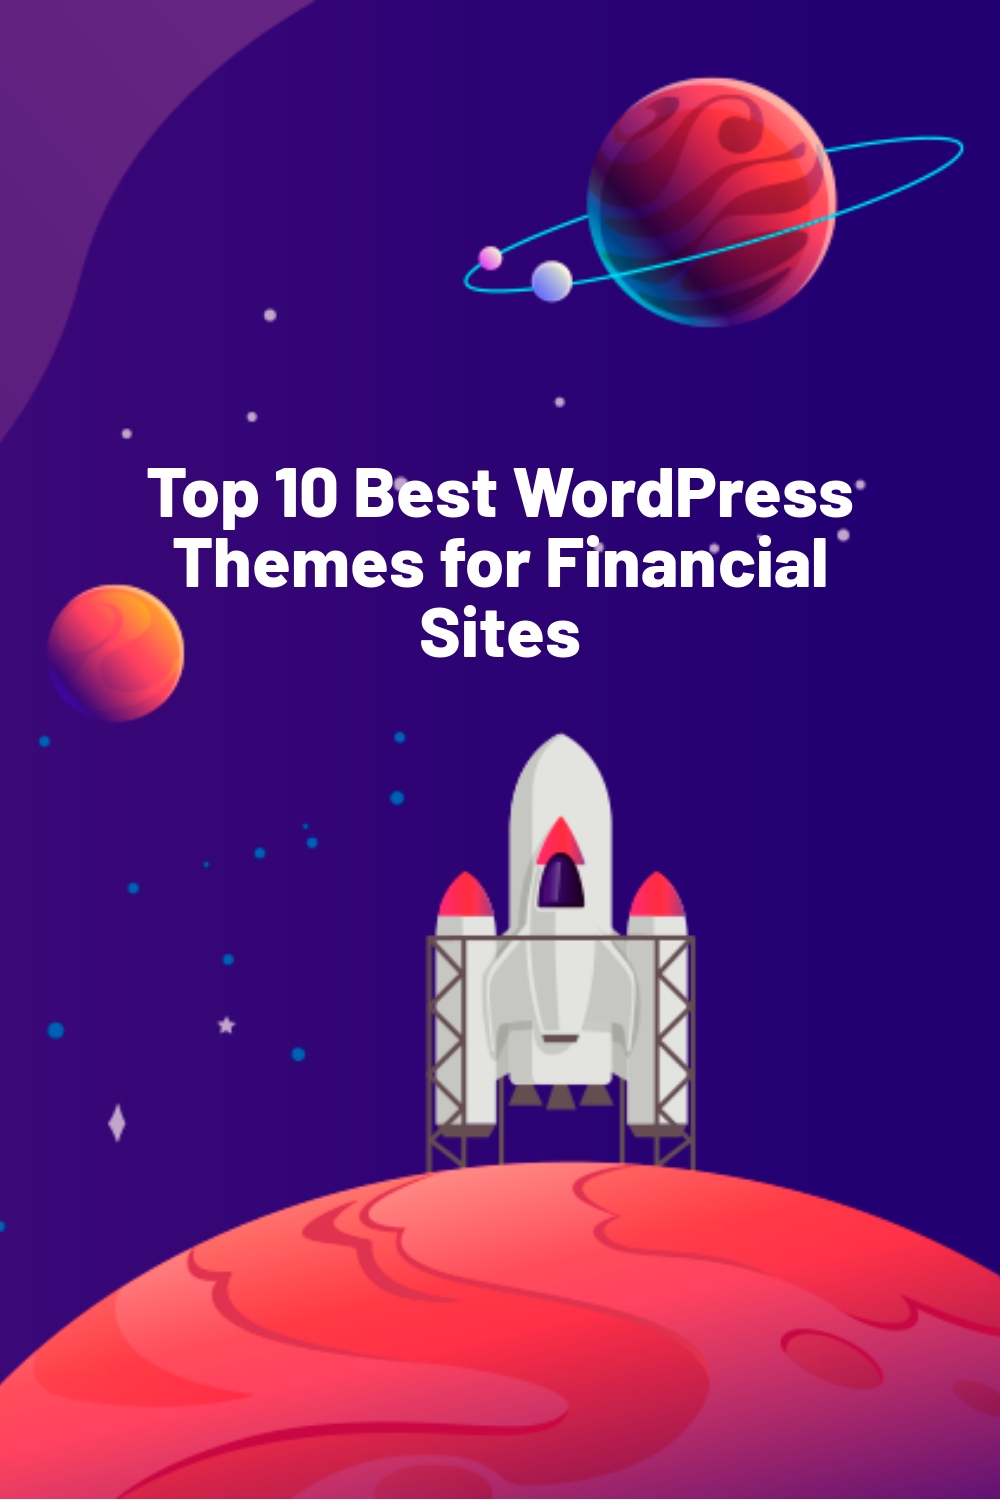 Top 10 Best WordPress Themes for Financial Sites